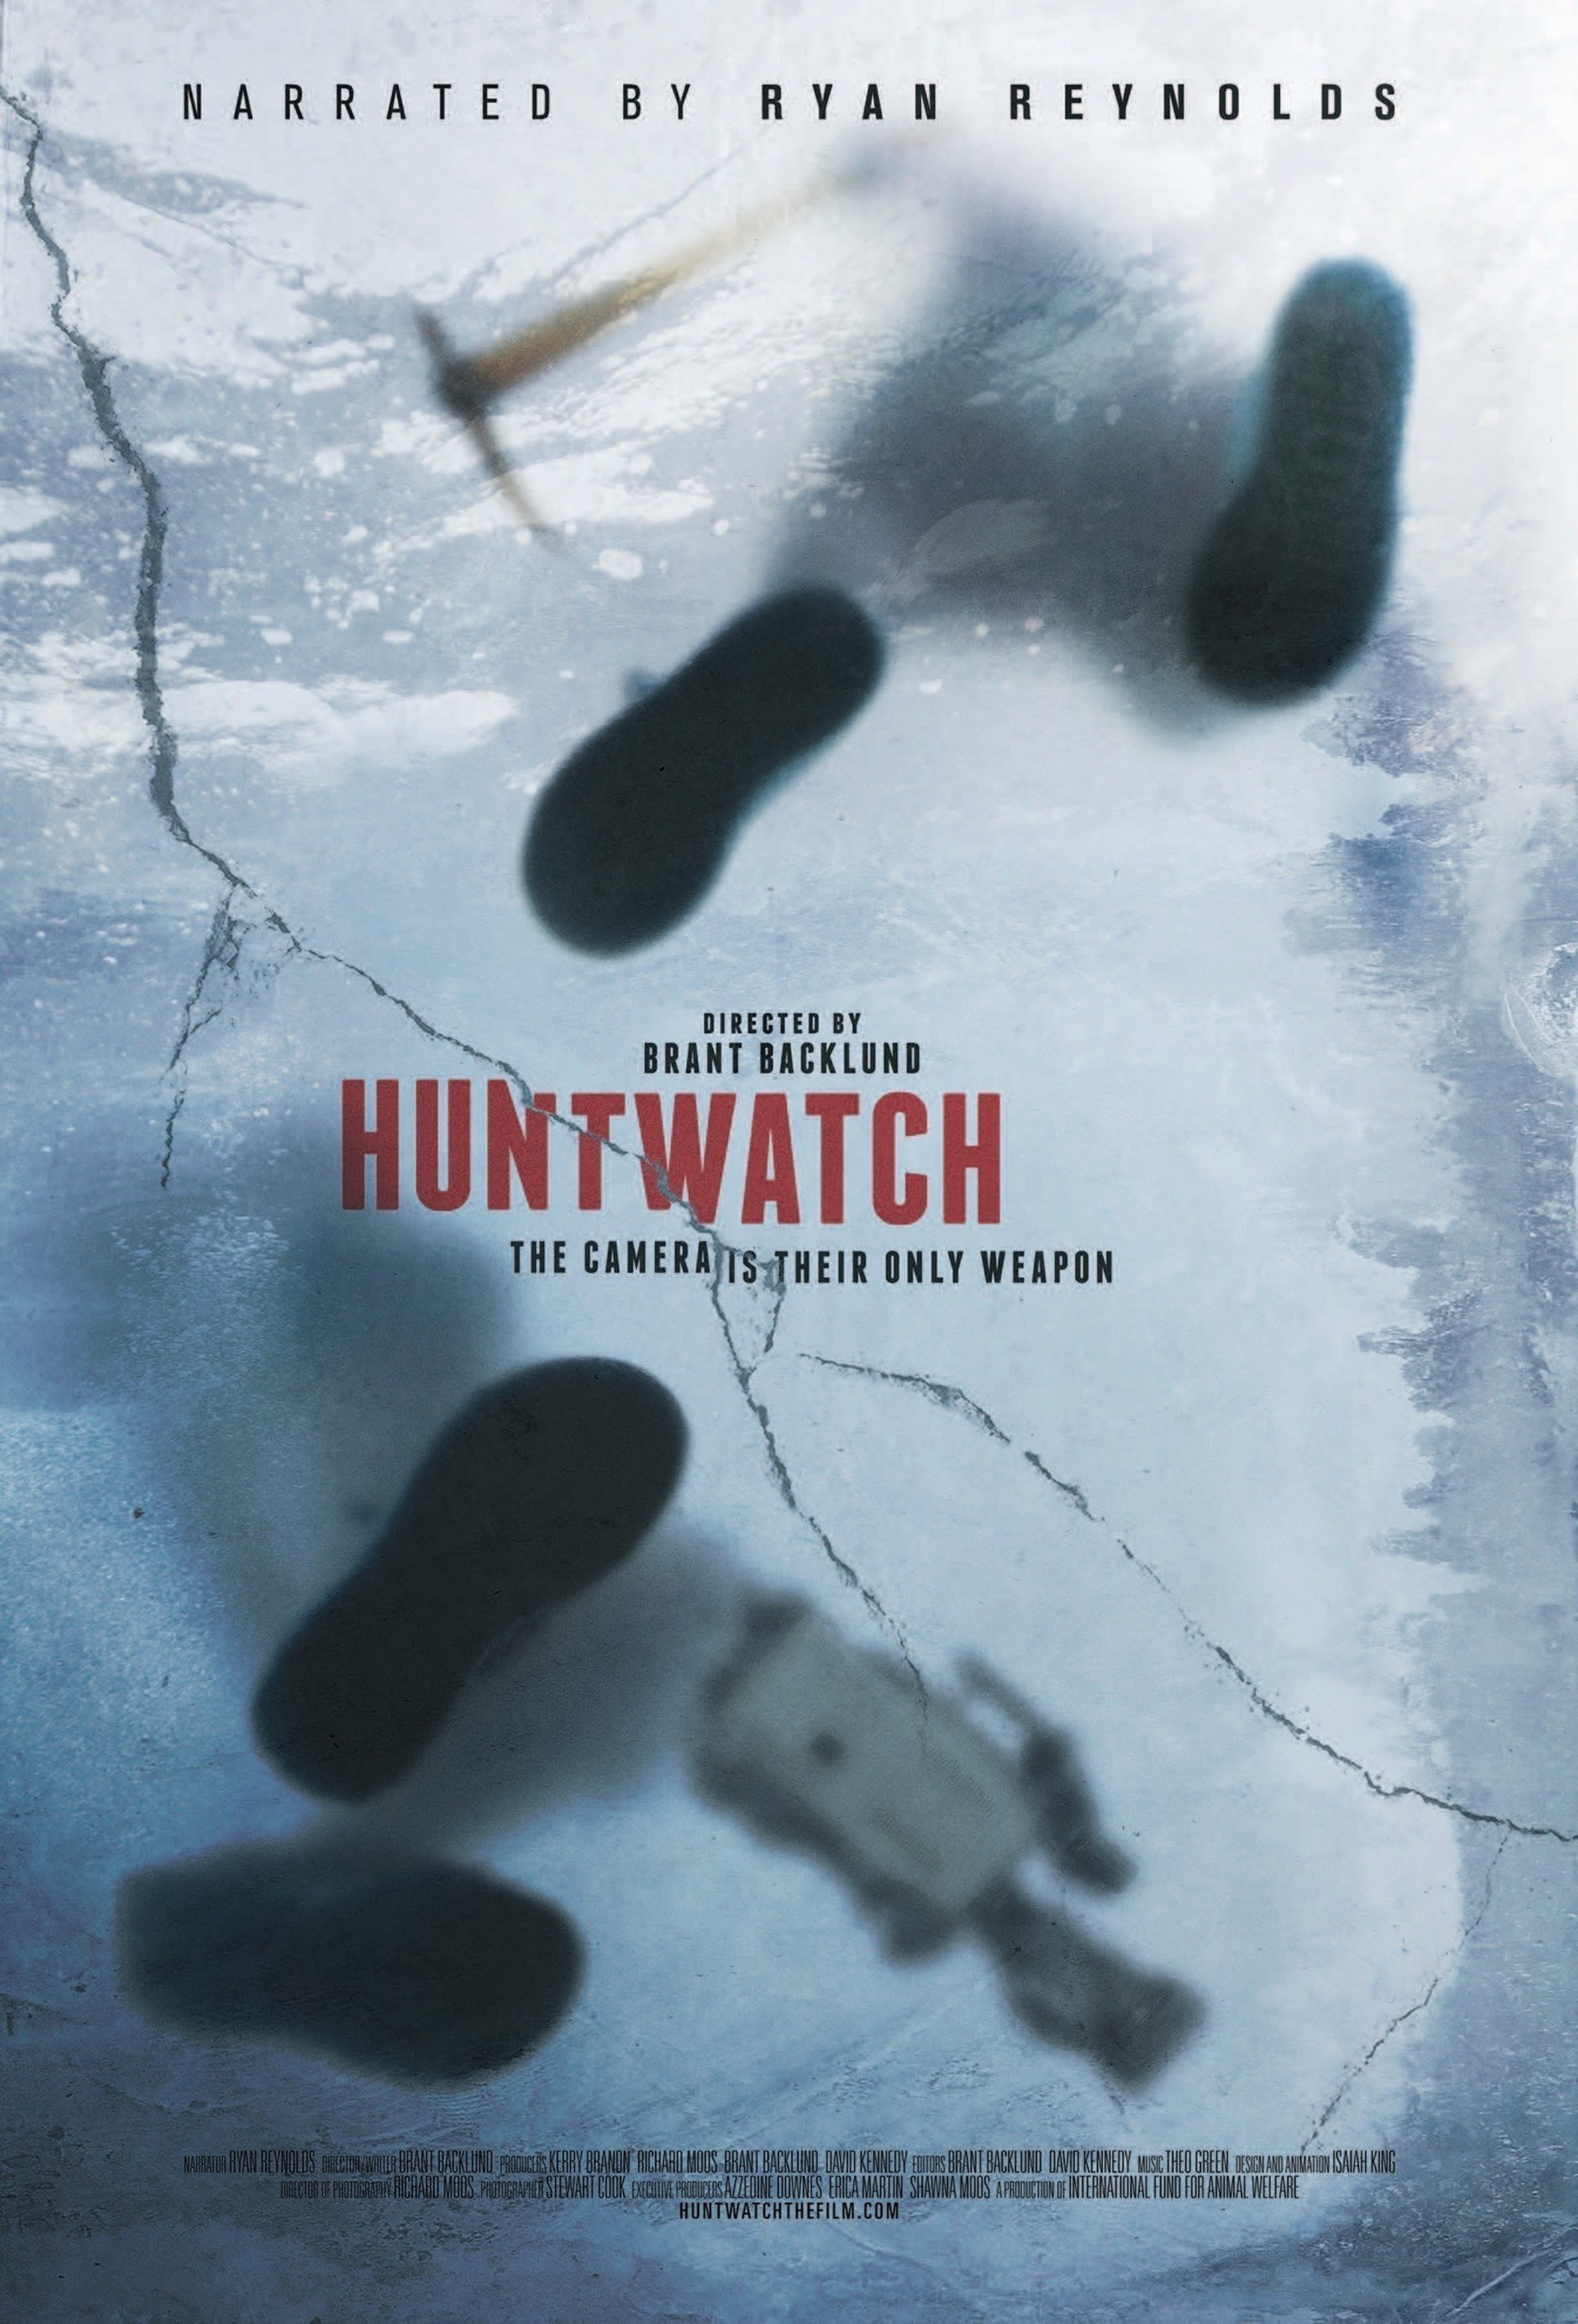 Ryan Reynolds narrates wildlife documentary Huntwatch (http://huntwatchthefilm.com) premiering at DOC NYC (http://www.docnyc.net) on Nov. 14 at the SVA Theatre at 4:30 p.m. Seals, lies and videotapes - violent confrontation boils over on the ice floes of Canada as activists, fishermen and politicians battle over the fate of baby seals.